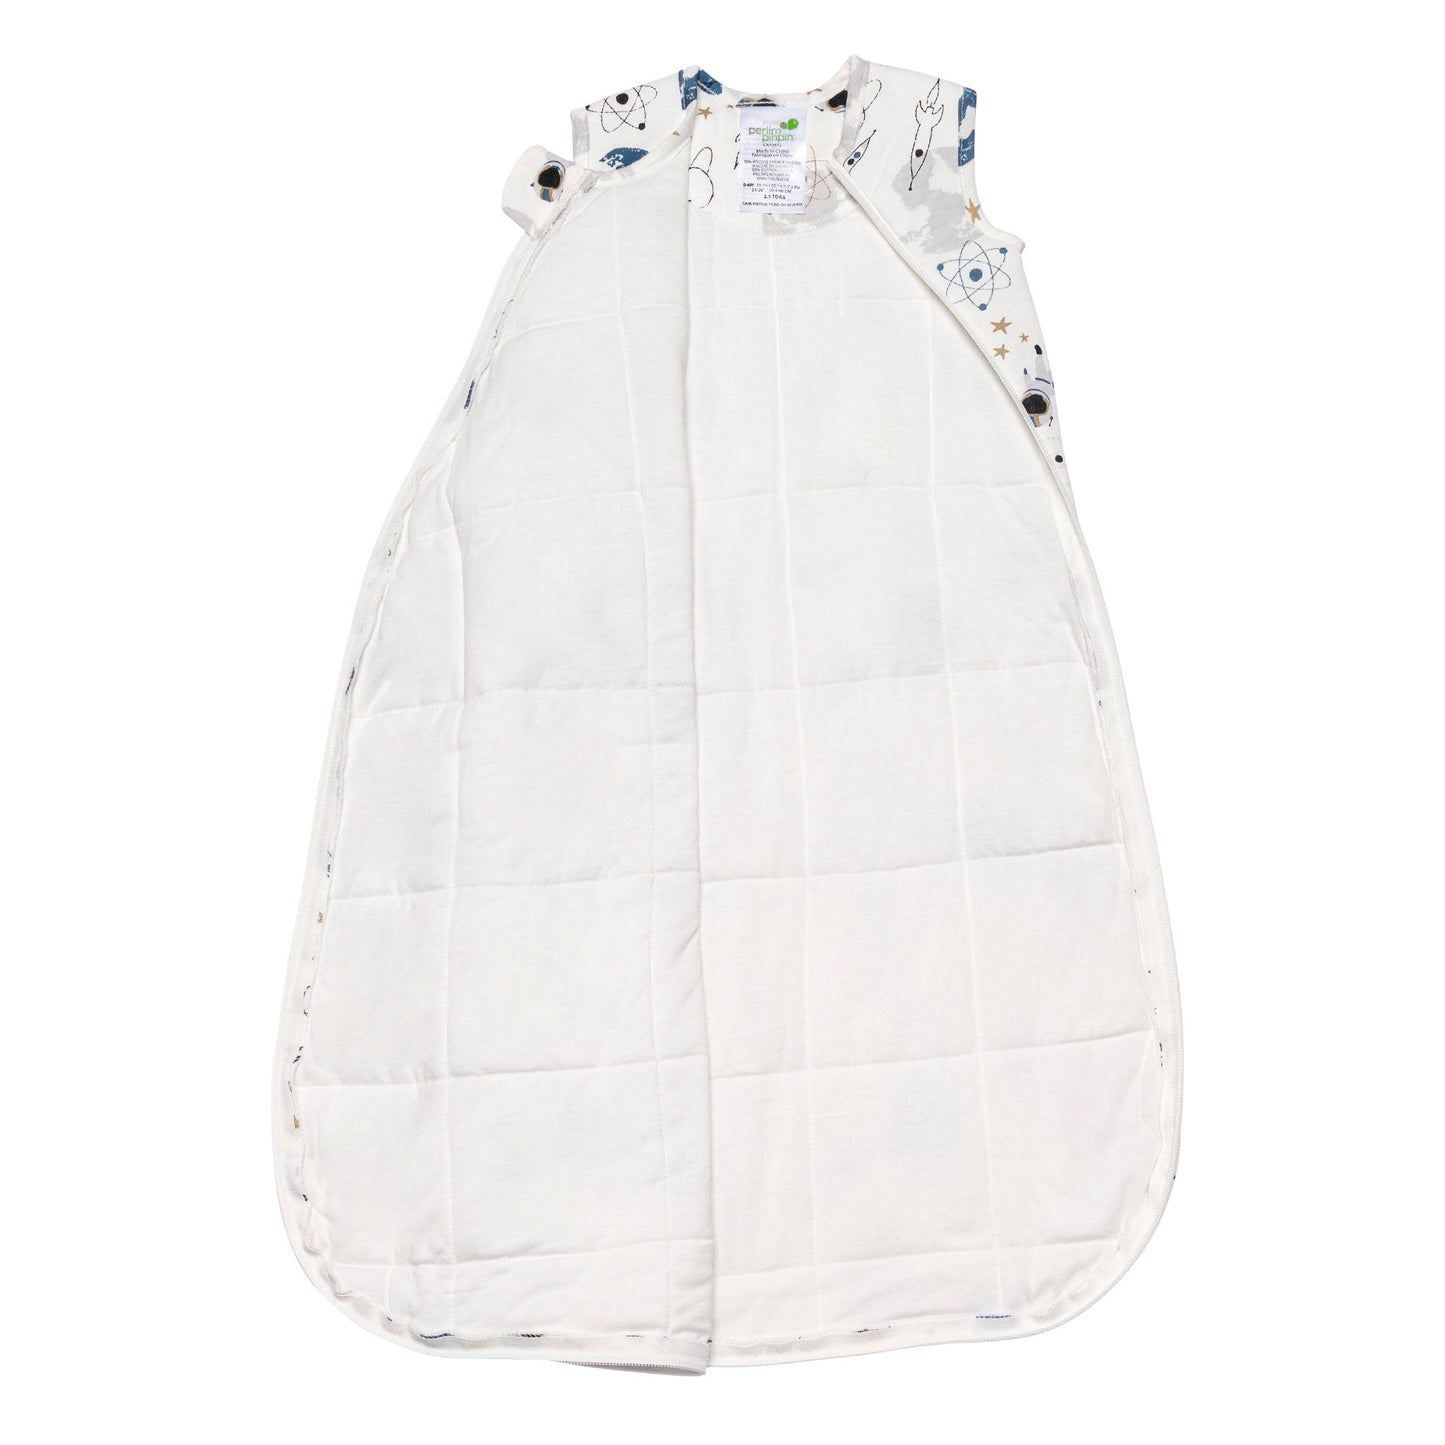 Quilted bamboo sleep sack - Space (1.0 tog)